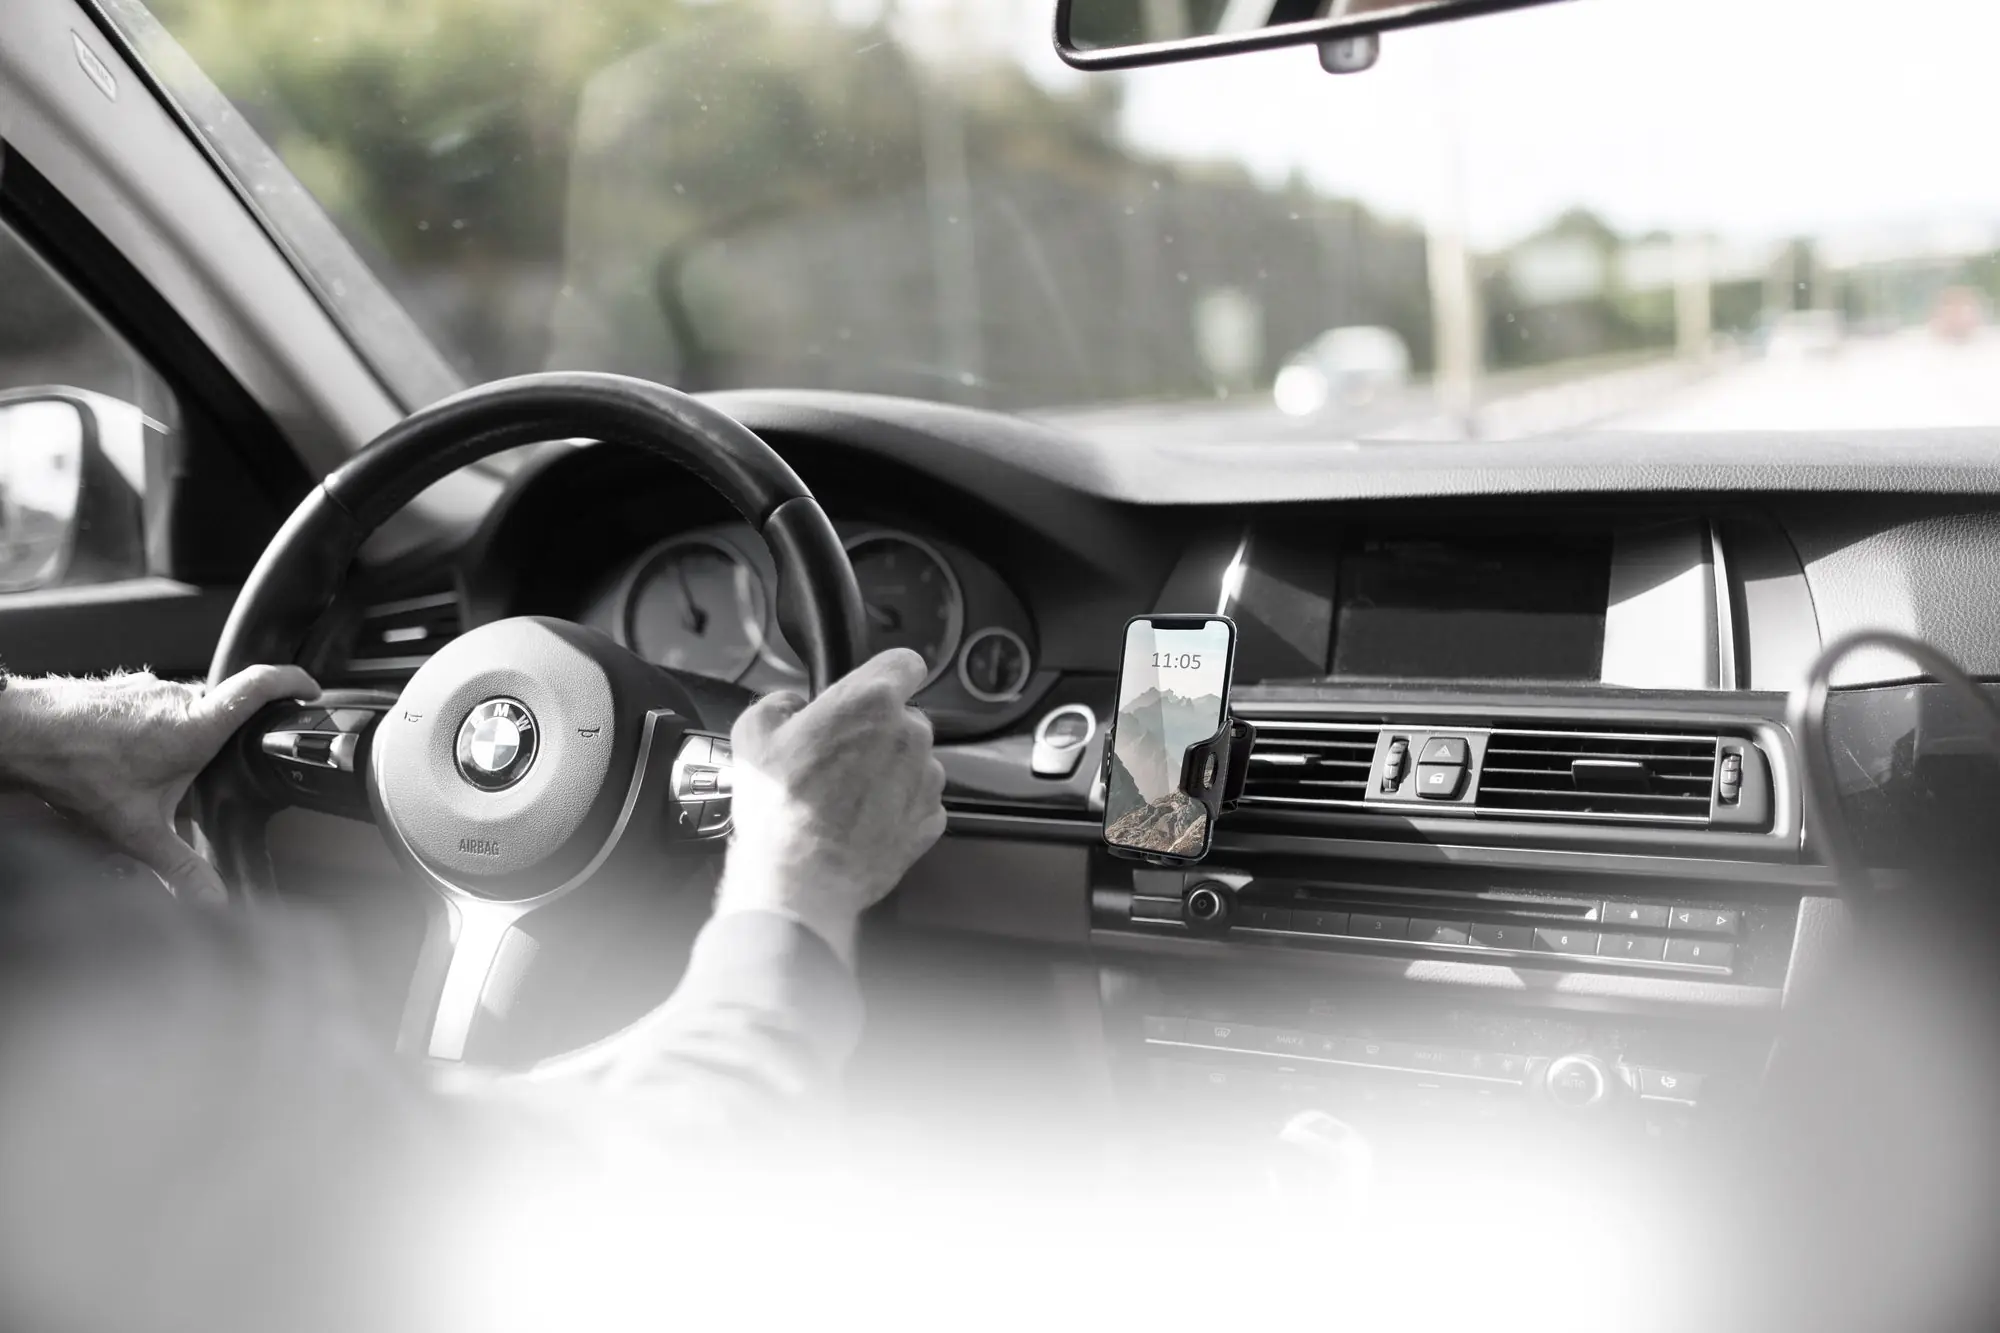 Enhance Your Driving Experience with the Adreama Universal Car Mount